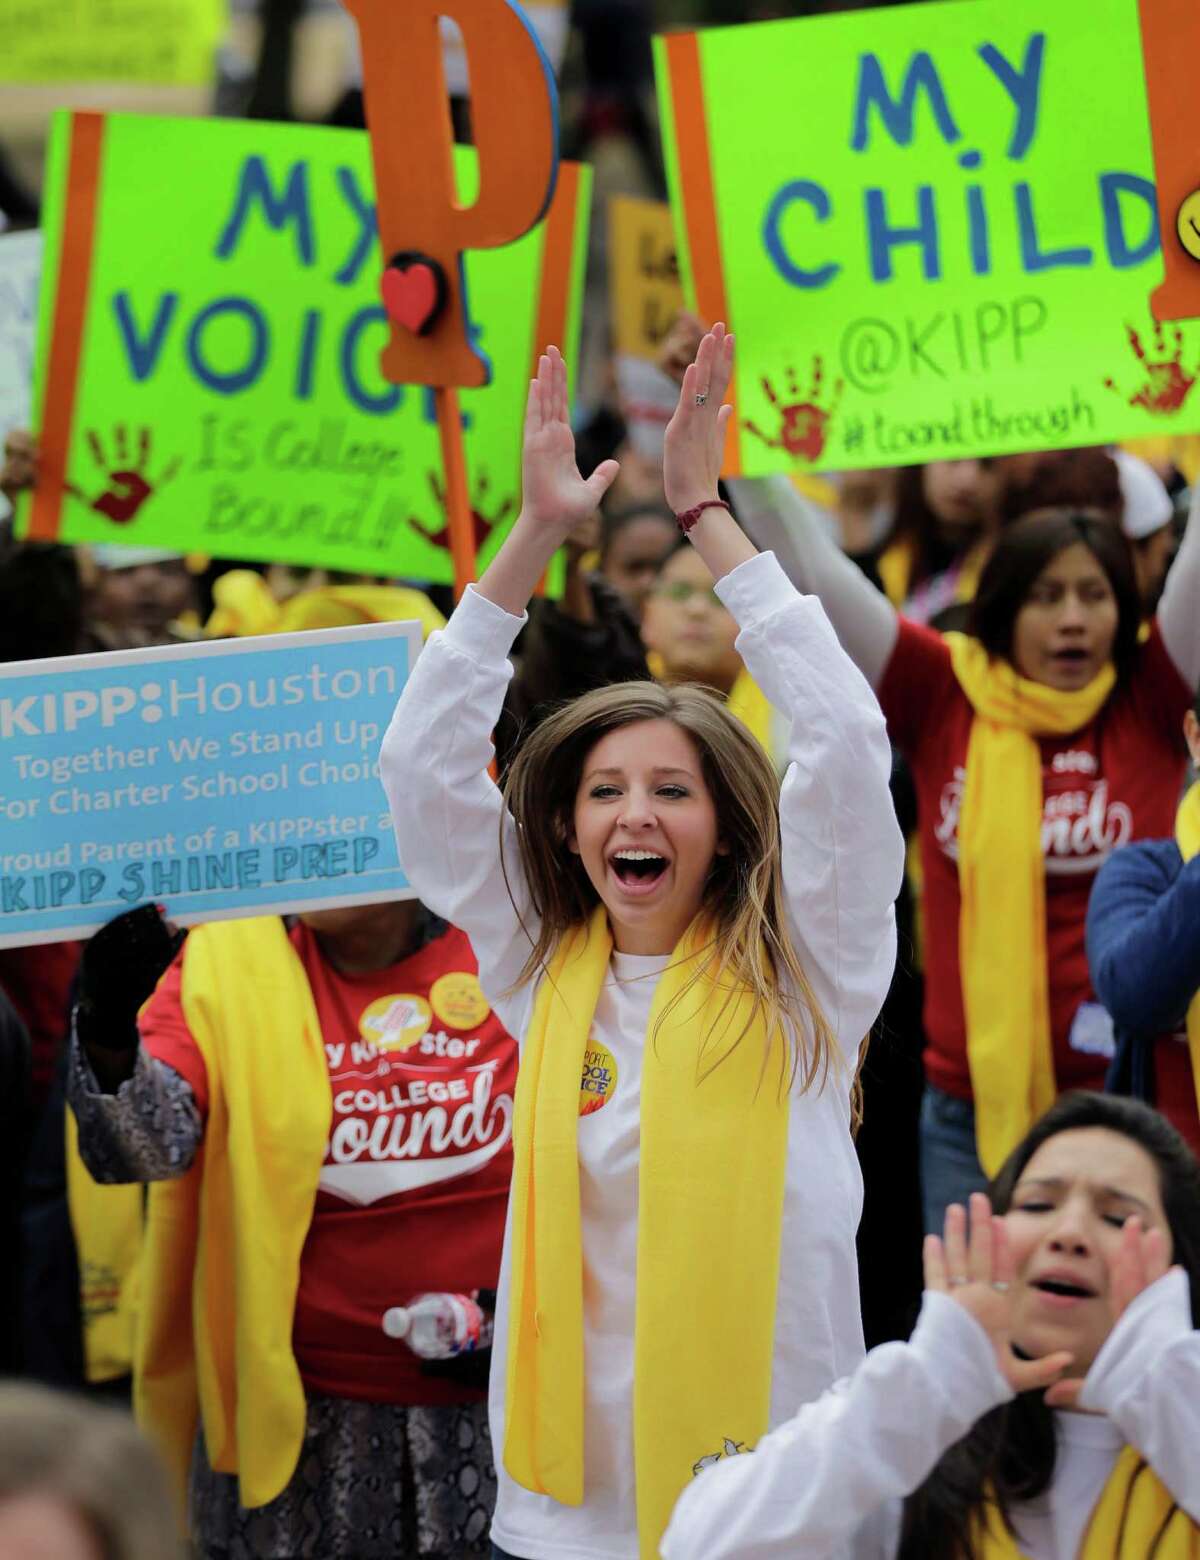 Students, teachers and supporters cheer during a school choice rally at the Texas Capitol, Friday, Jan. 30, 2015, in Austin, Texas. School choice supporters called for expanding voucher programs and charter schools statewide. (AP Photo/Eric Gay)